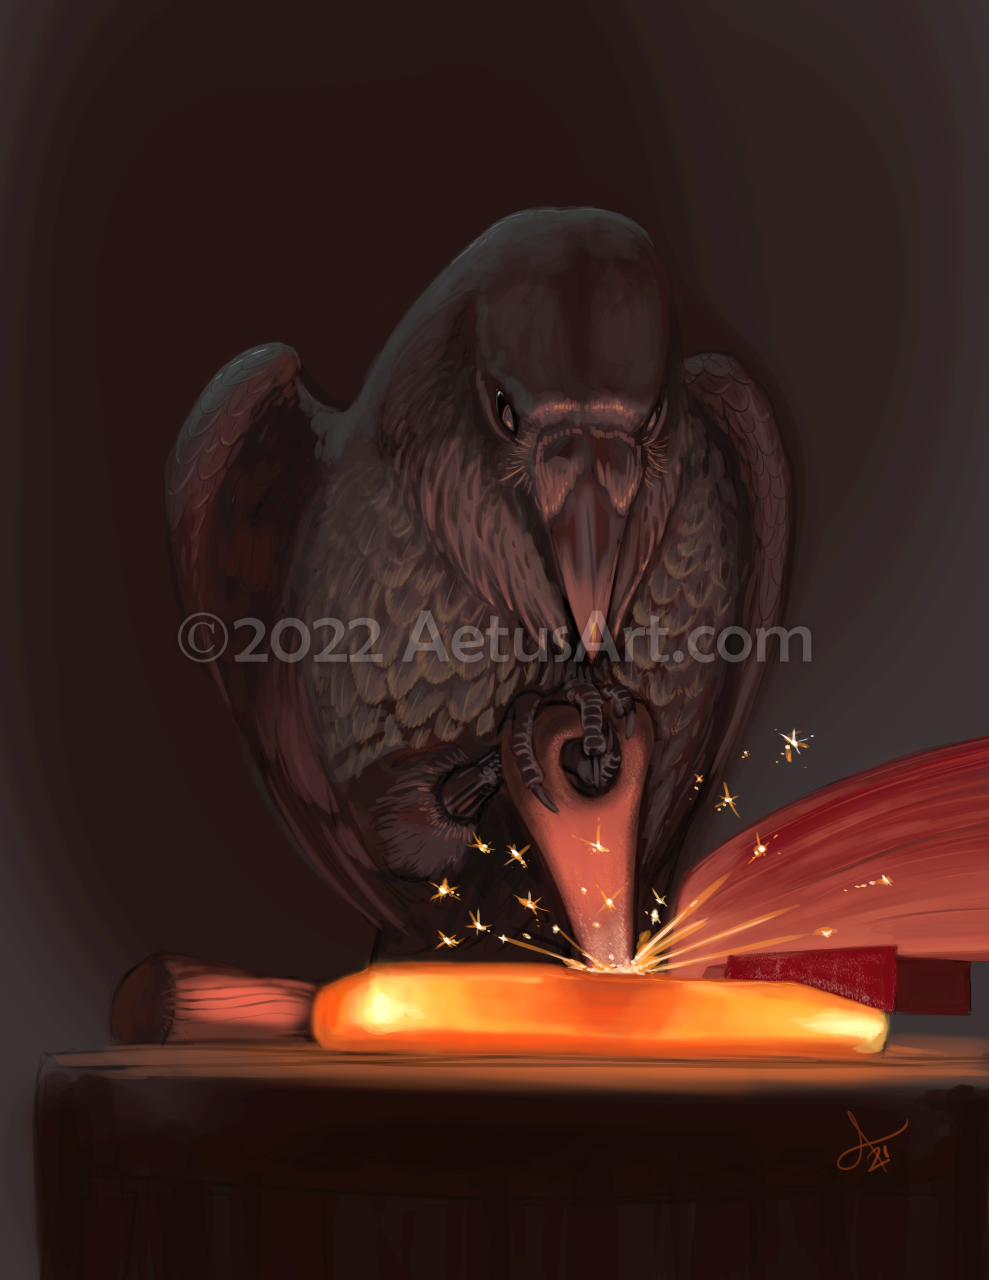 A raven holding a short hammer pounds on a glowing hot piece of steel.